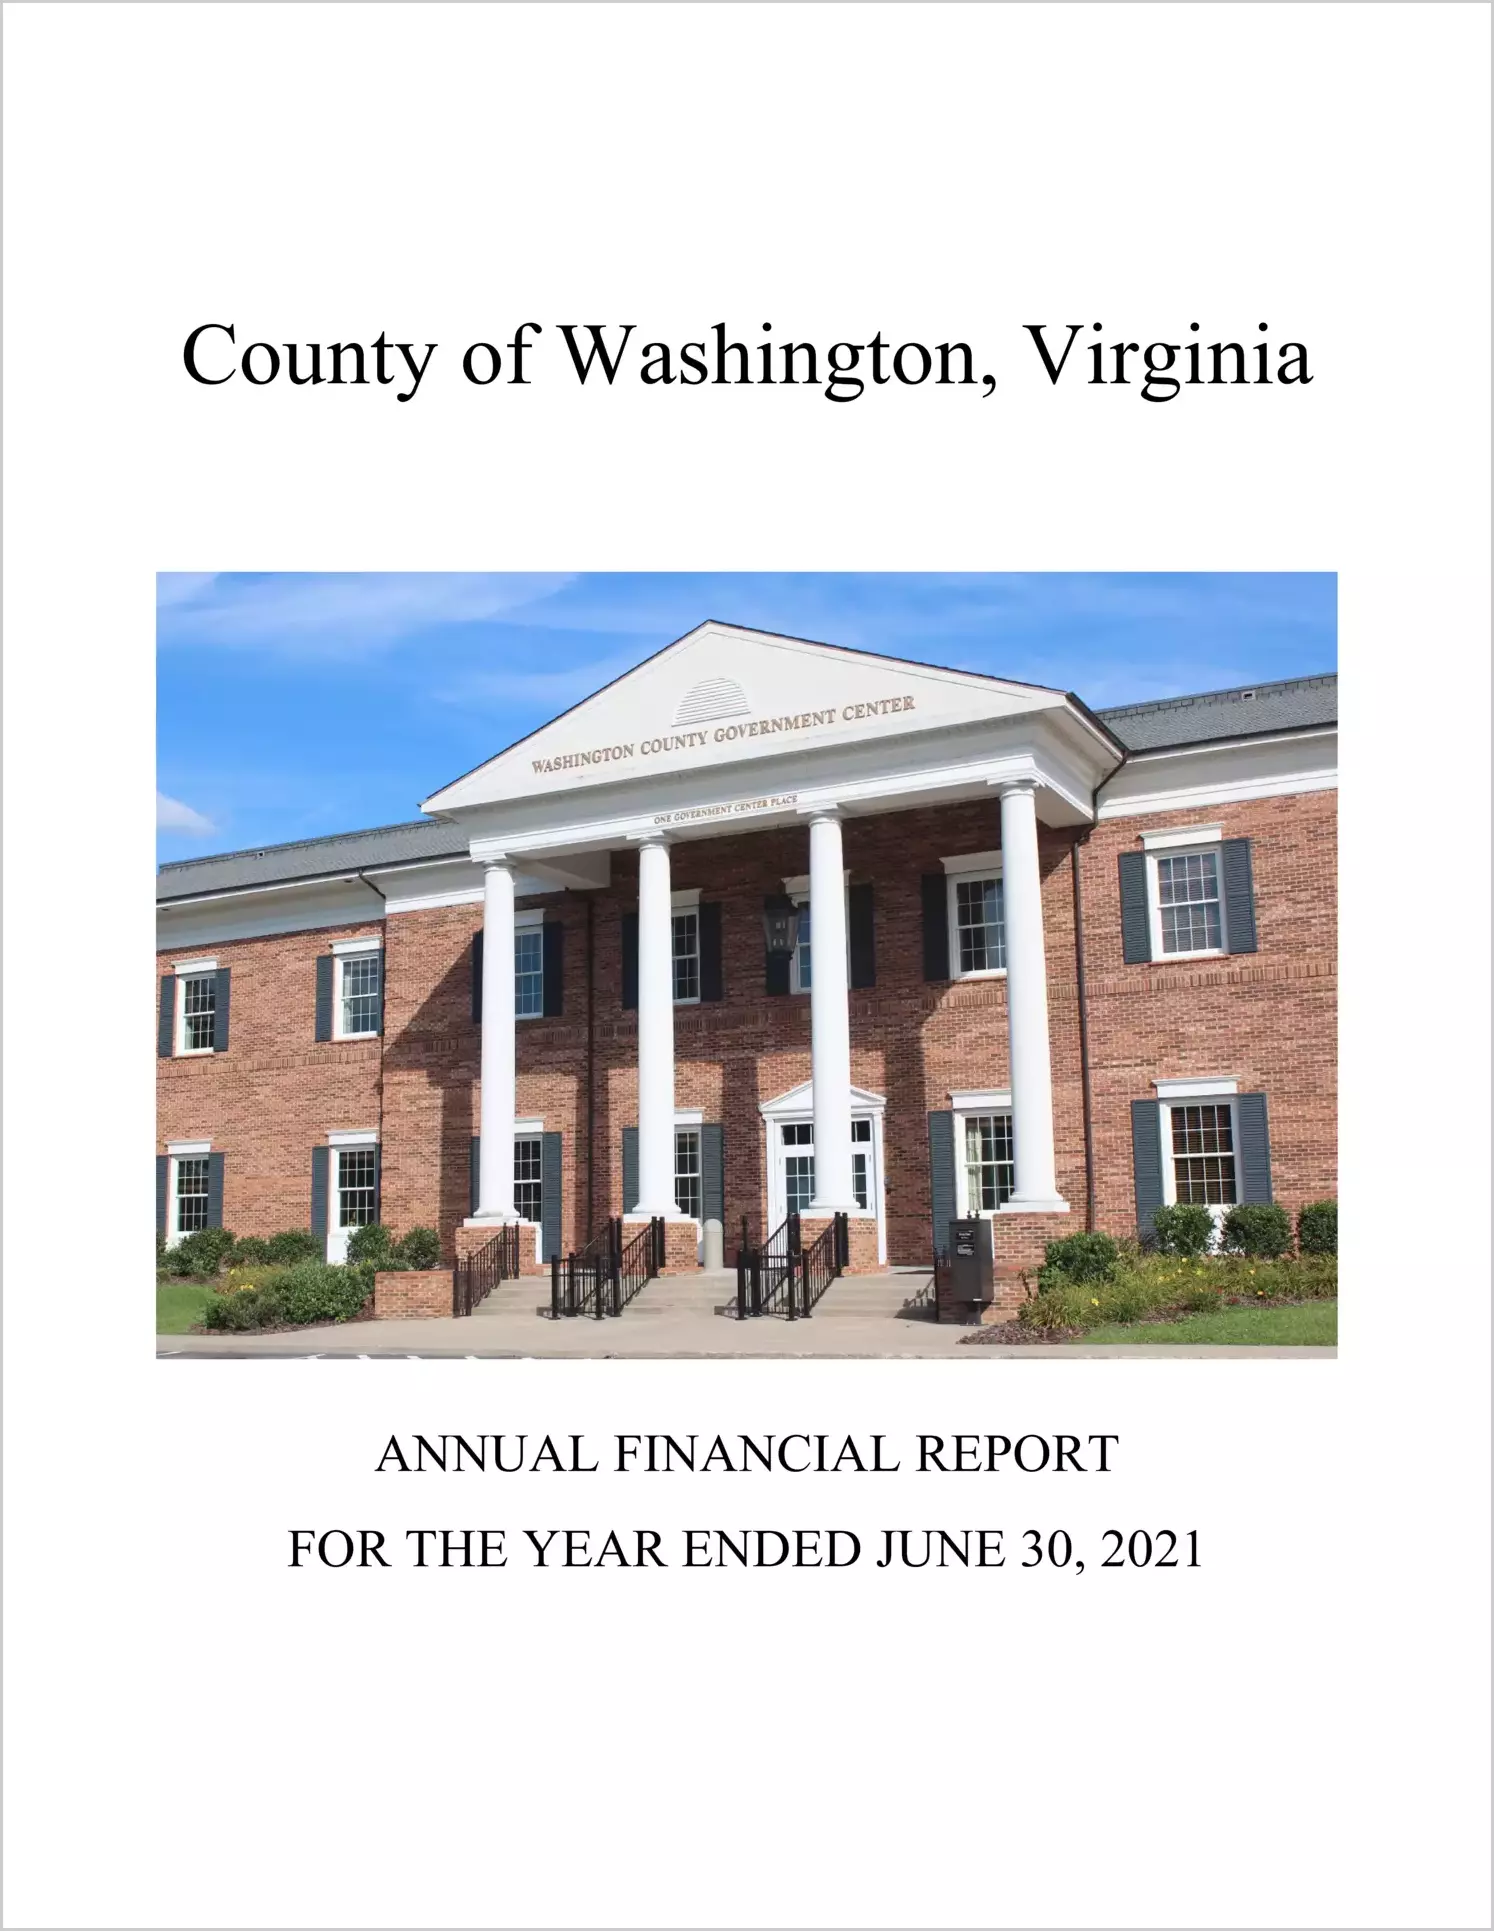 2021 Annual Financial Report for County of Washington